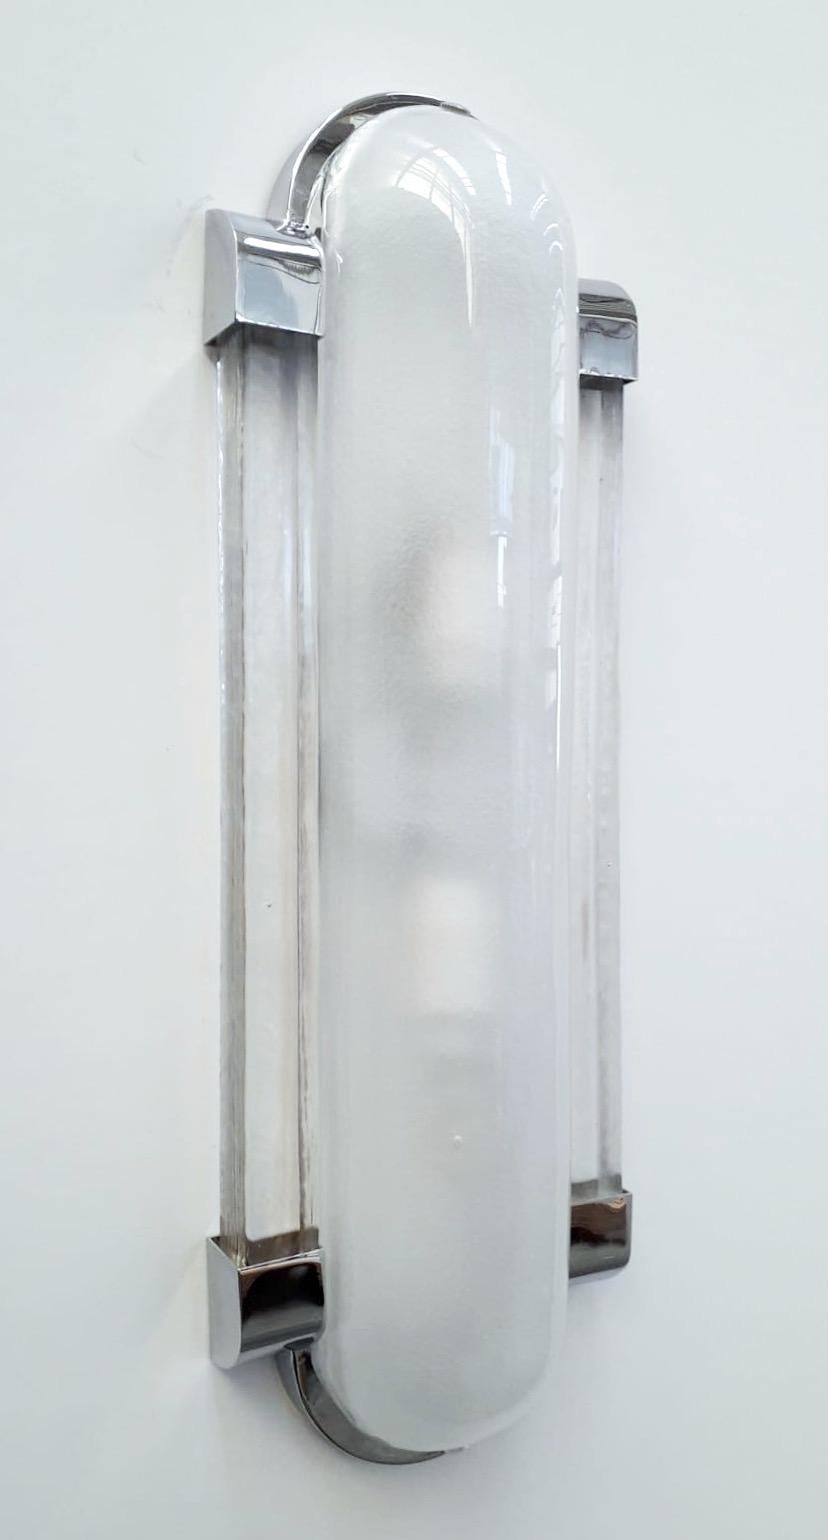 Italian Art Deco style wall light or flushmount with frosted Murano glass mounted on polished chrome frame / Designed by Fabio Bergomi for Fabio Ltd / Made in Italy
2 lights / E12 or E14 max 40W each.
Measures: height 18.5 inches, width 6.5